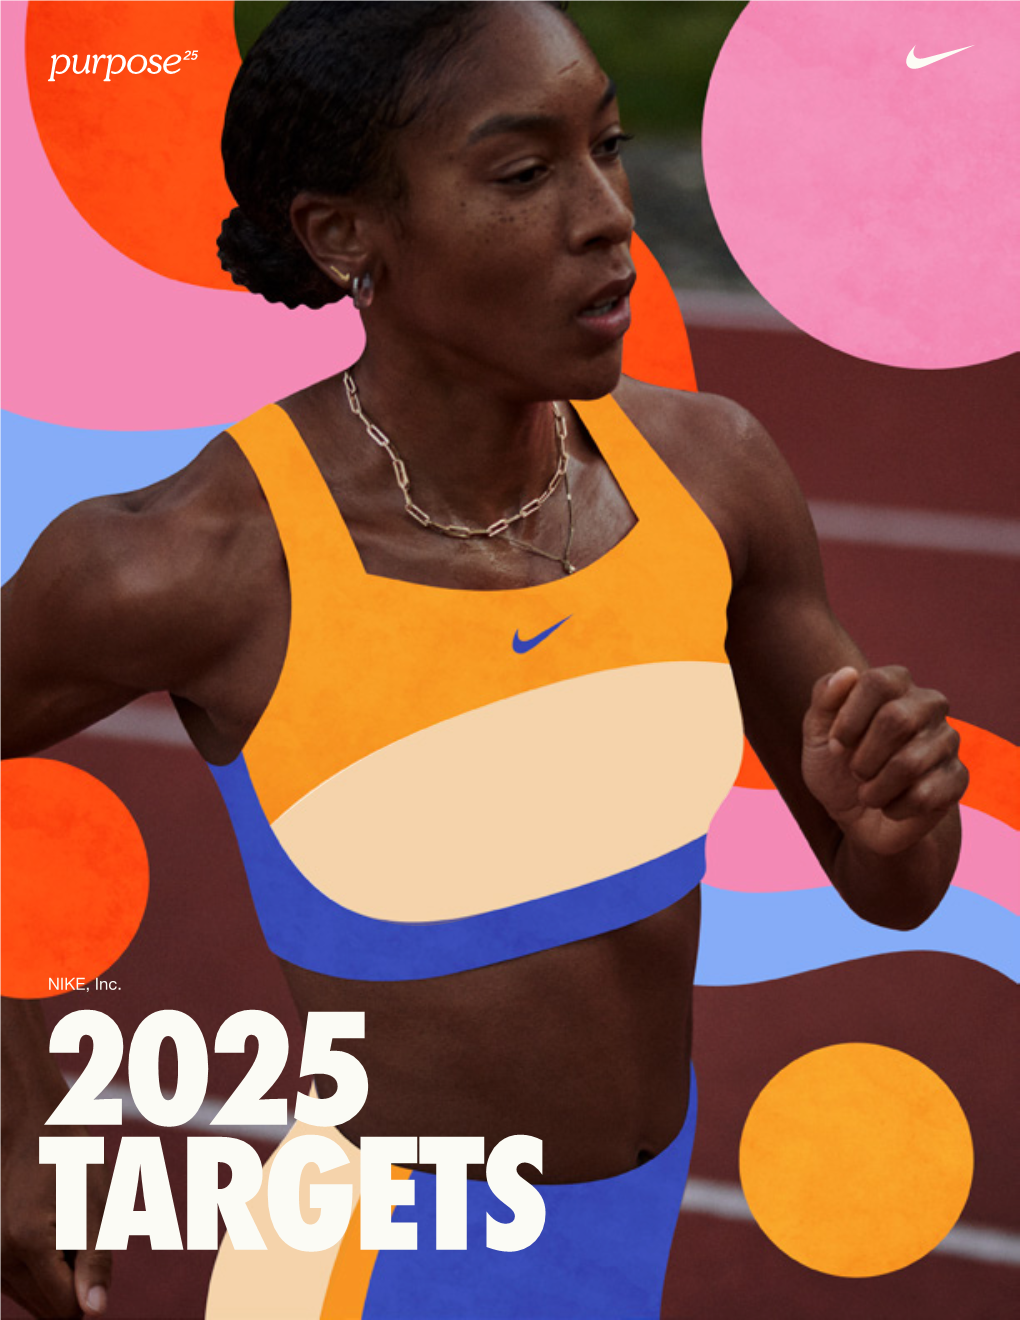 NIKE, Inc. 2025 TARGETS Our Vision 2025 TARGETS